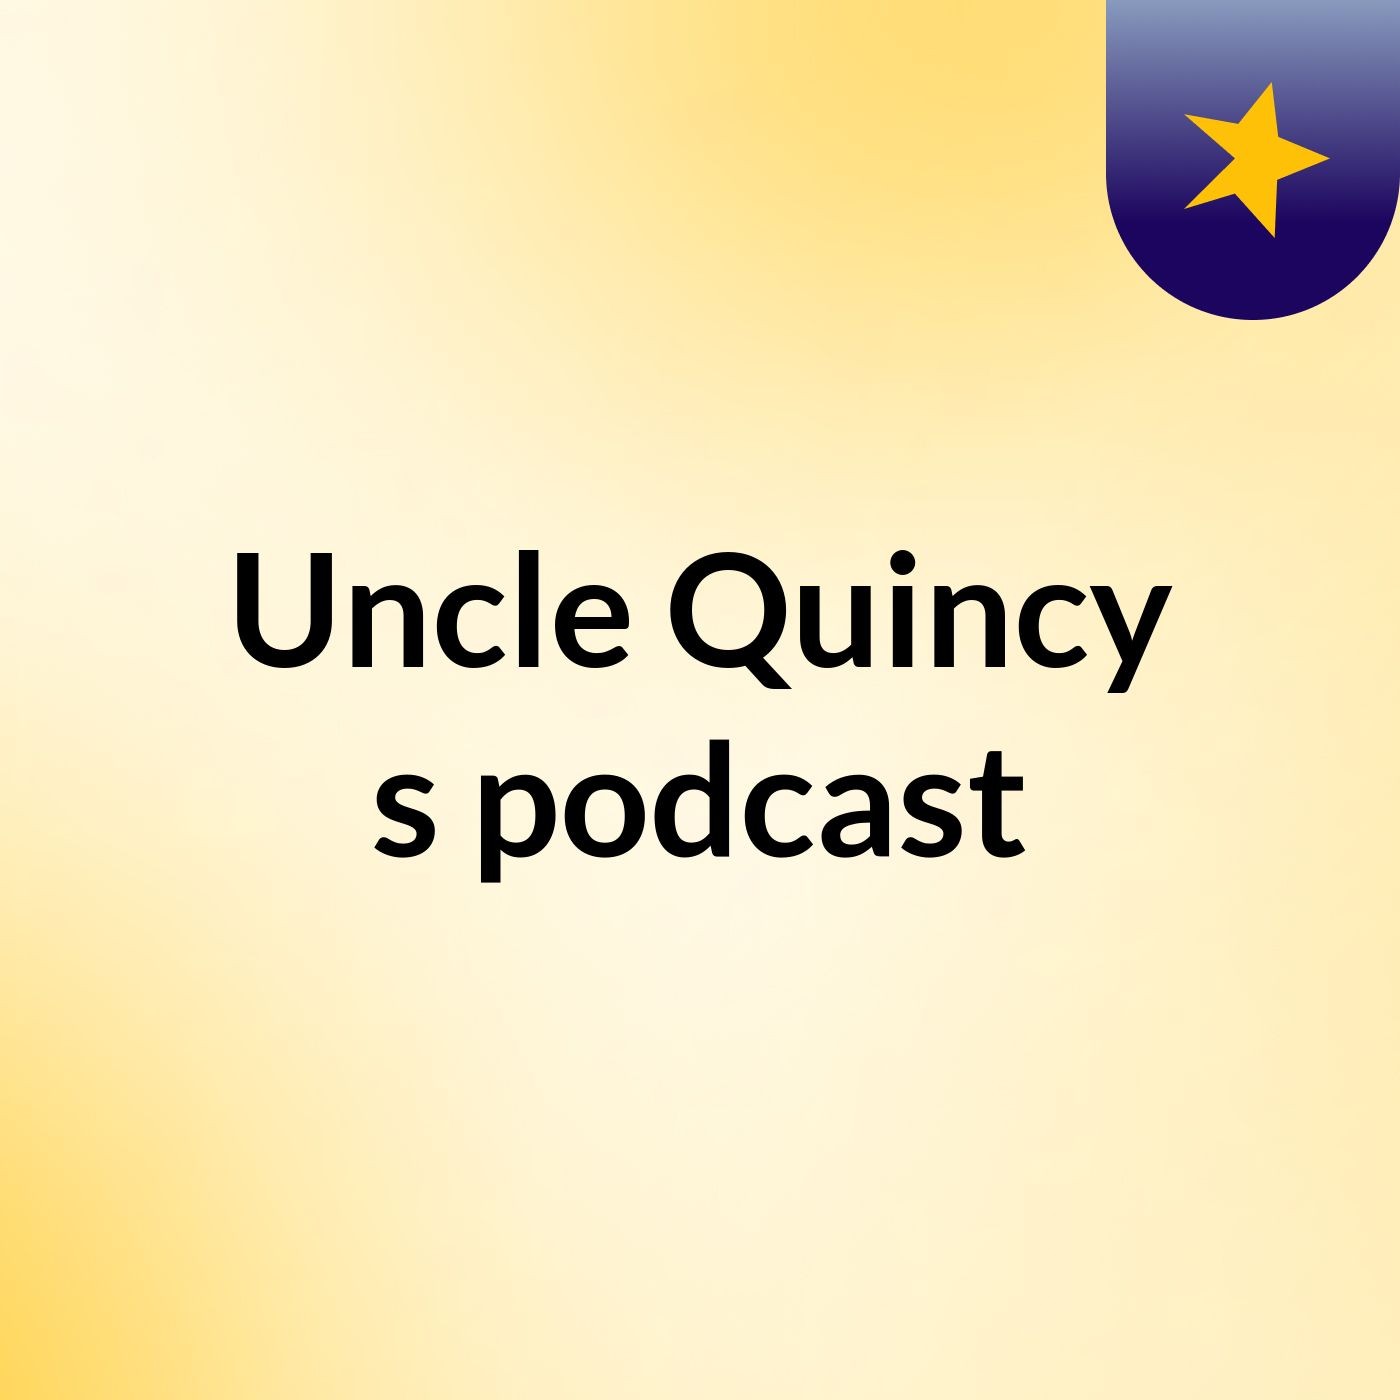 Uncle Quincy's podcast